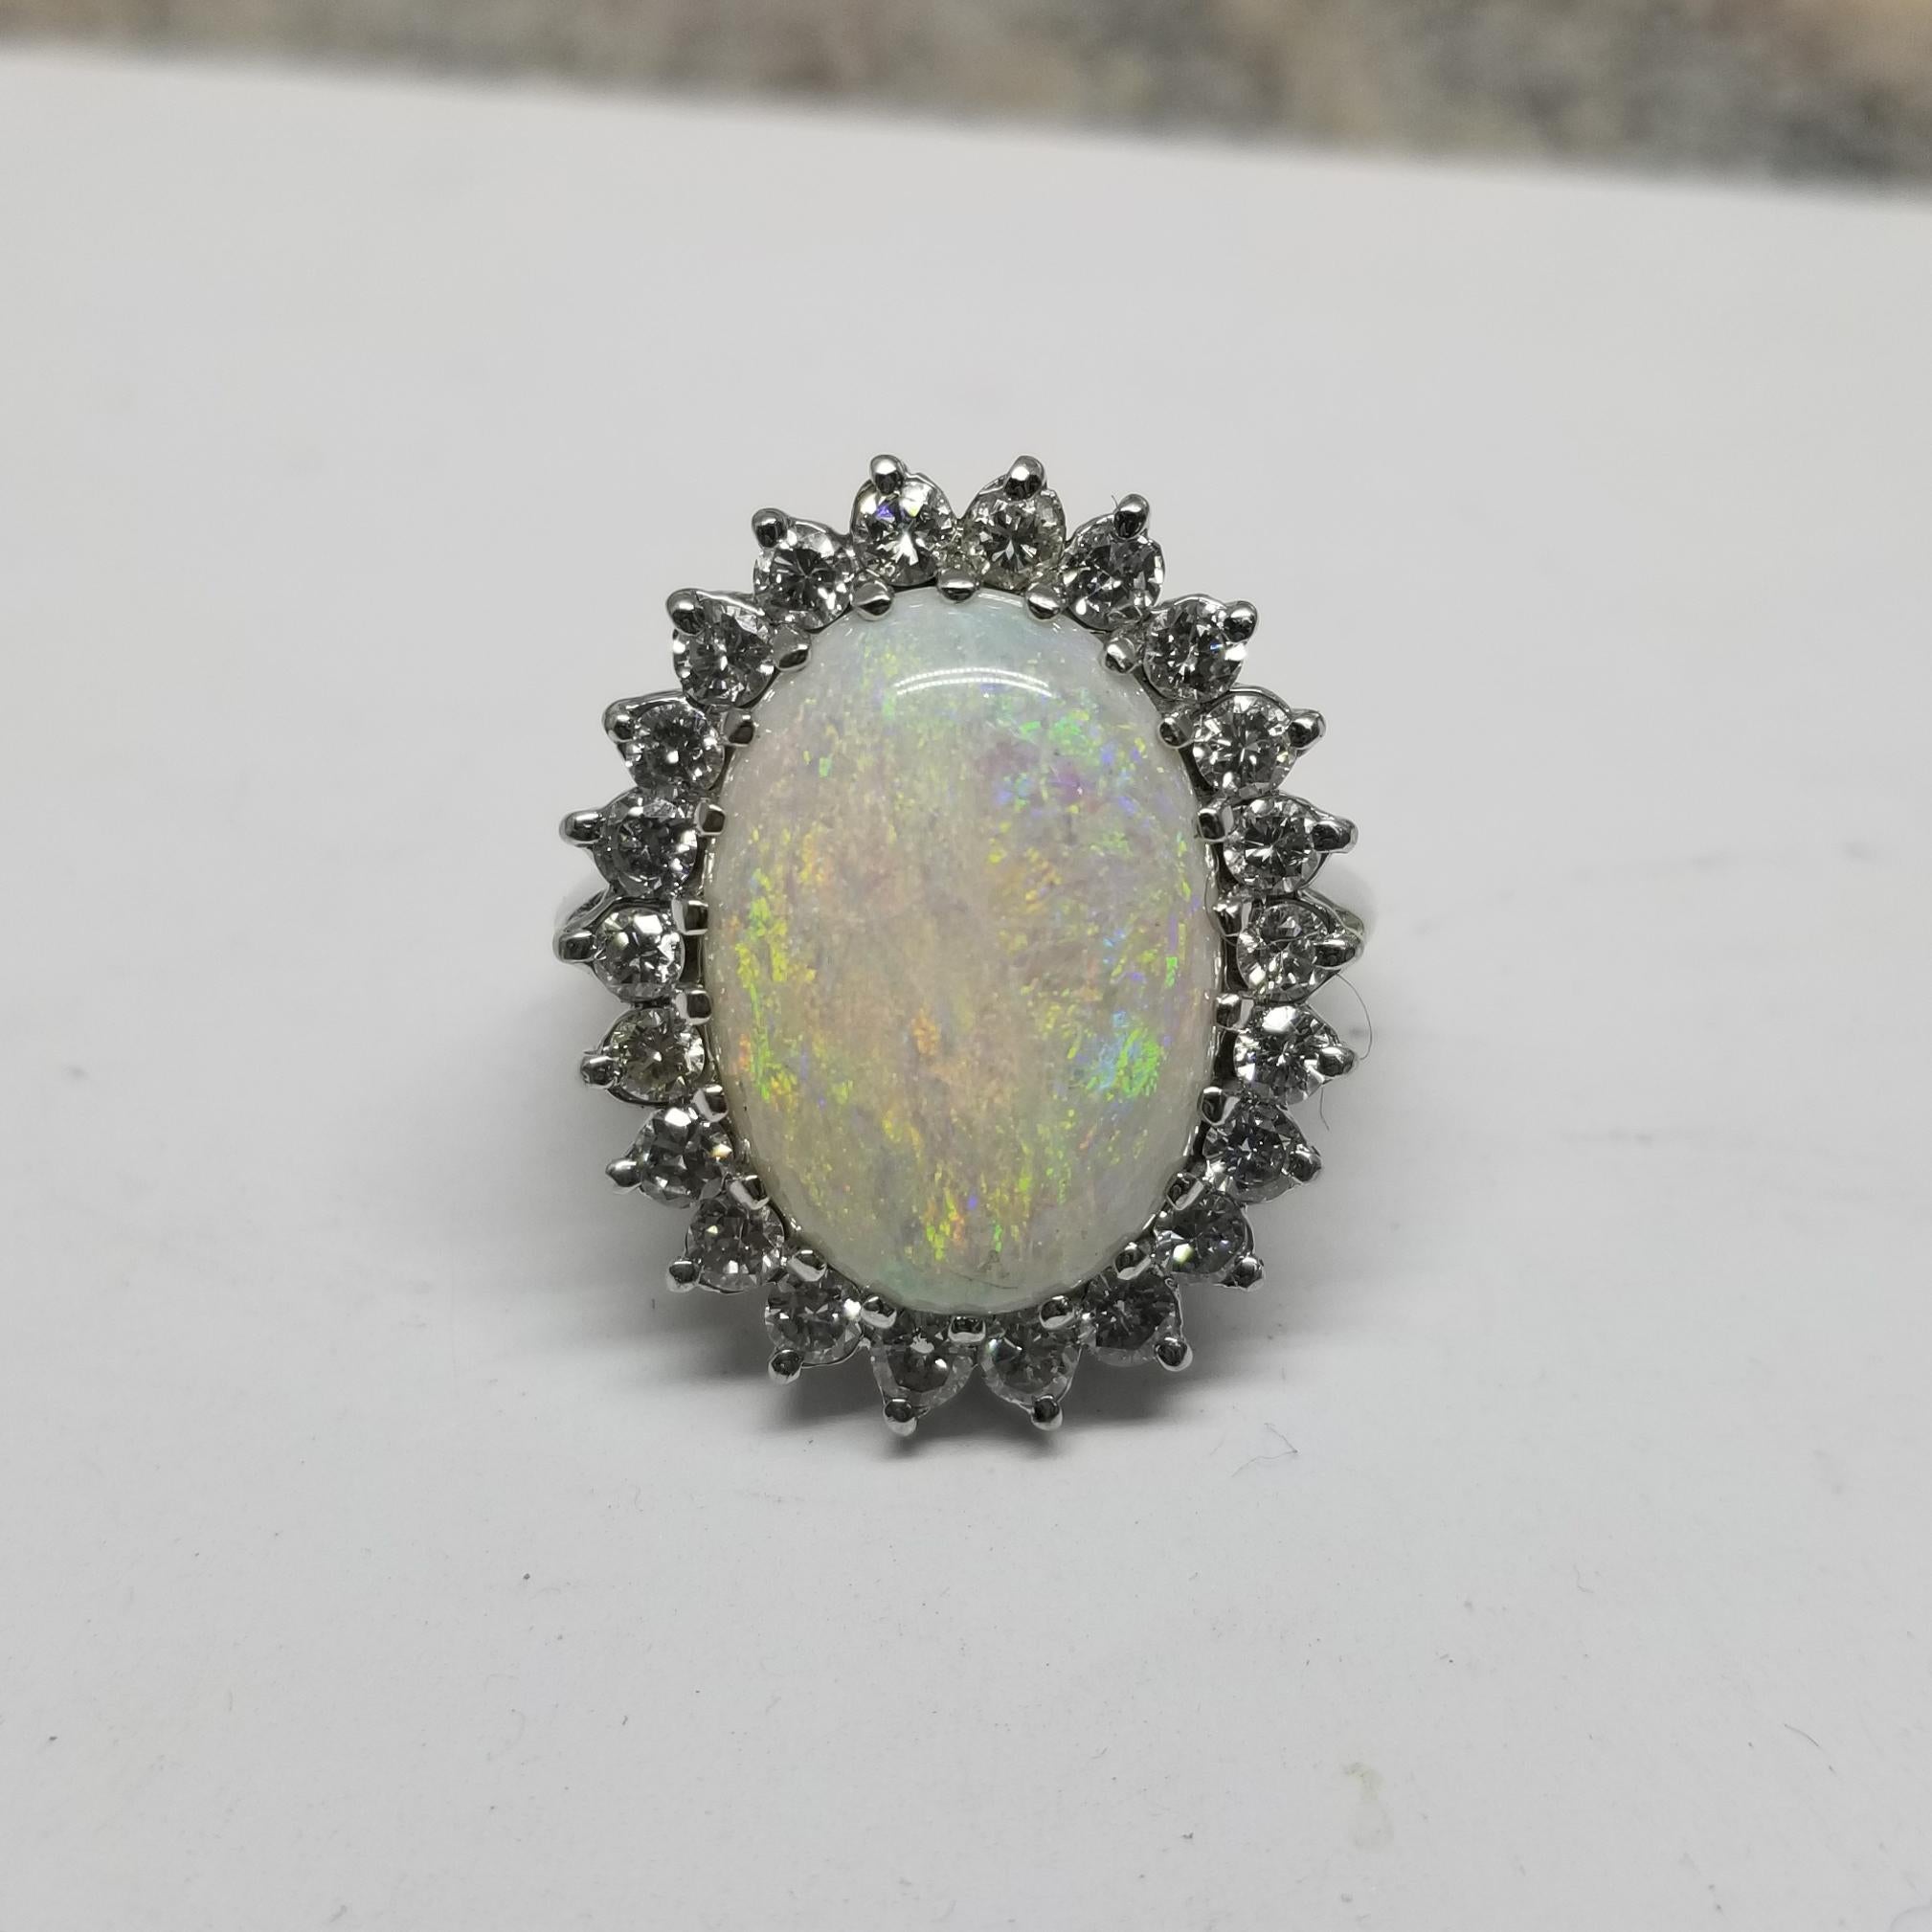 This beautiful Vintage 14k white gold fiery oval opal and diamond cocktail ring, containing 
Specifications:
    main stone: OVAL CUT OPAL STONE 18.20mm x 13.10mm
    weight: ESTIMATE 11.00CTS.
    diamonds: 22 PIECES ROUND CUT DIAMONDS
    carat